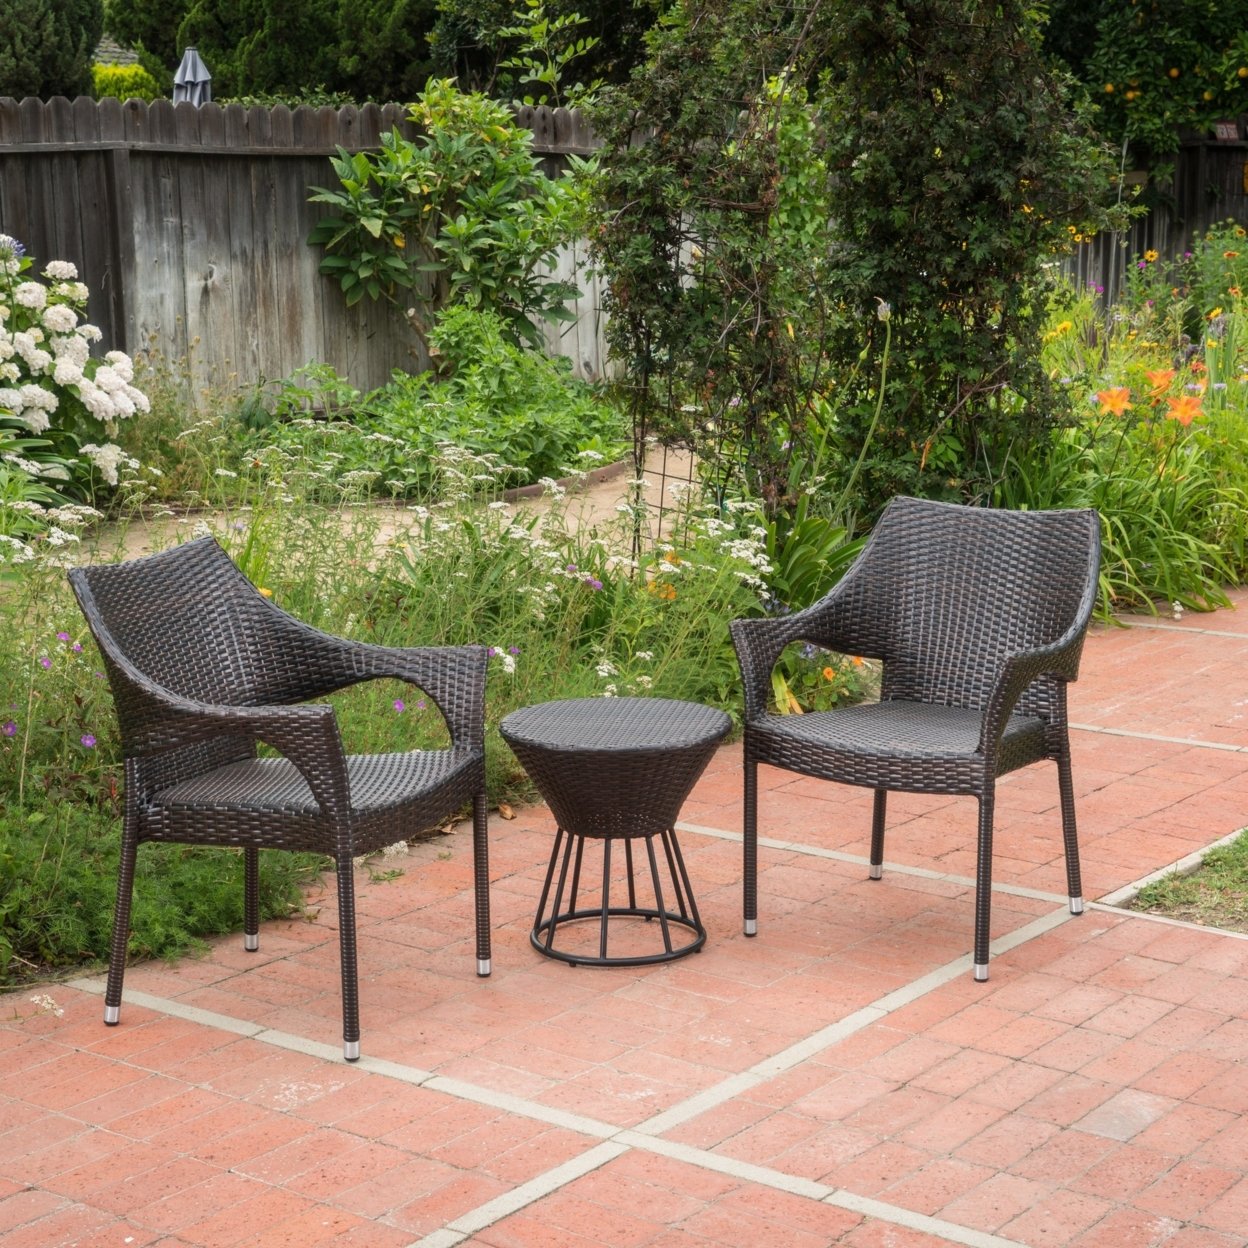 Alfheimr Outdoor 3 Piece Multi-brown Wicker Stacking Chair Chat Set - Framed Hour Glass Table